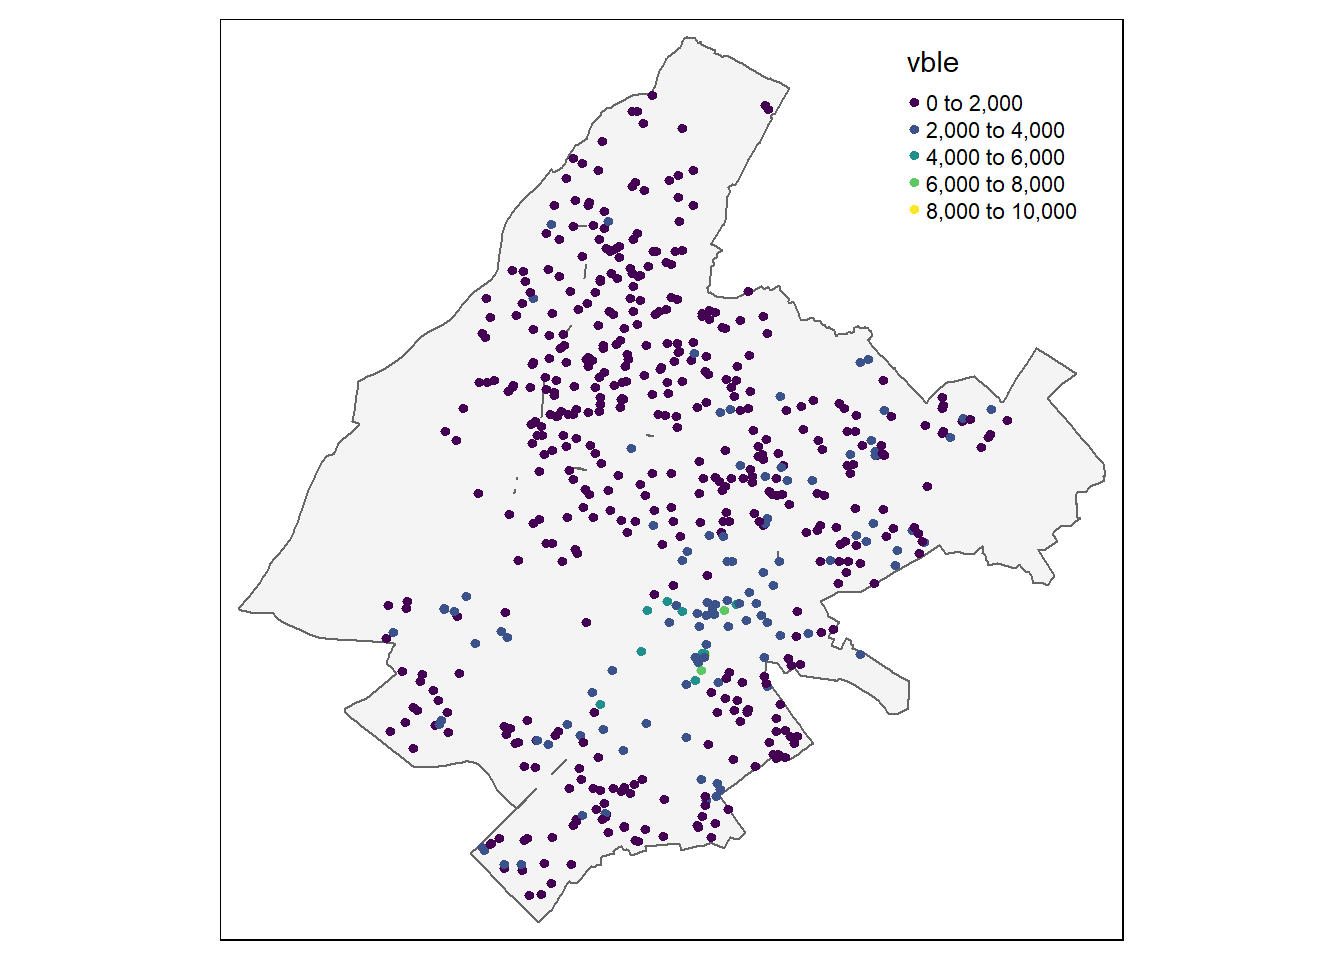 Top: Locations and prices per square meter of apartments in Athens. Bottom: Prediction locations.